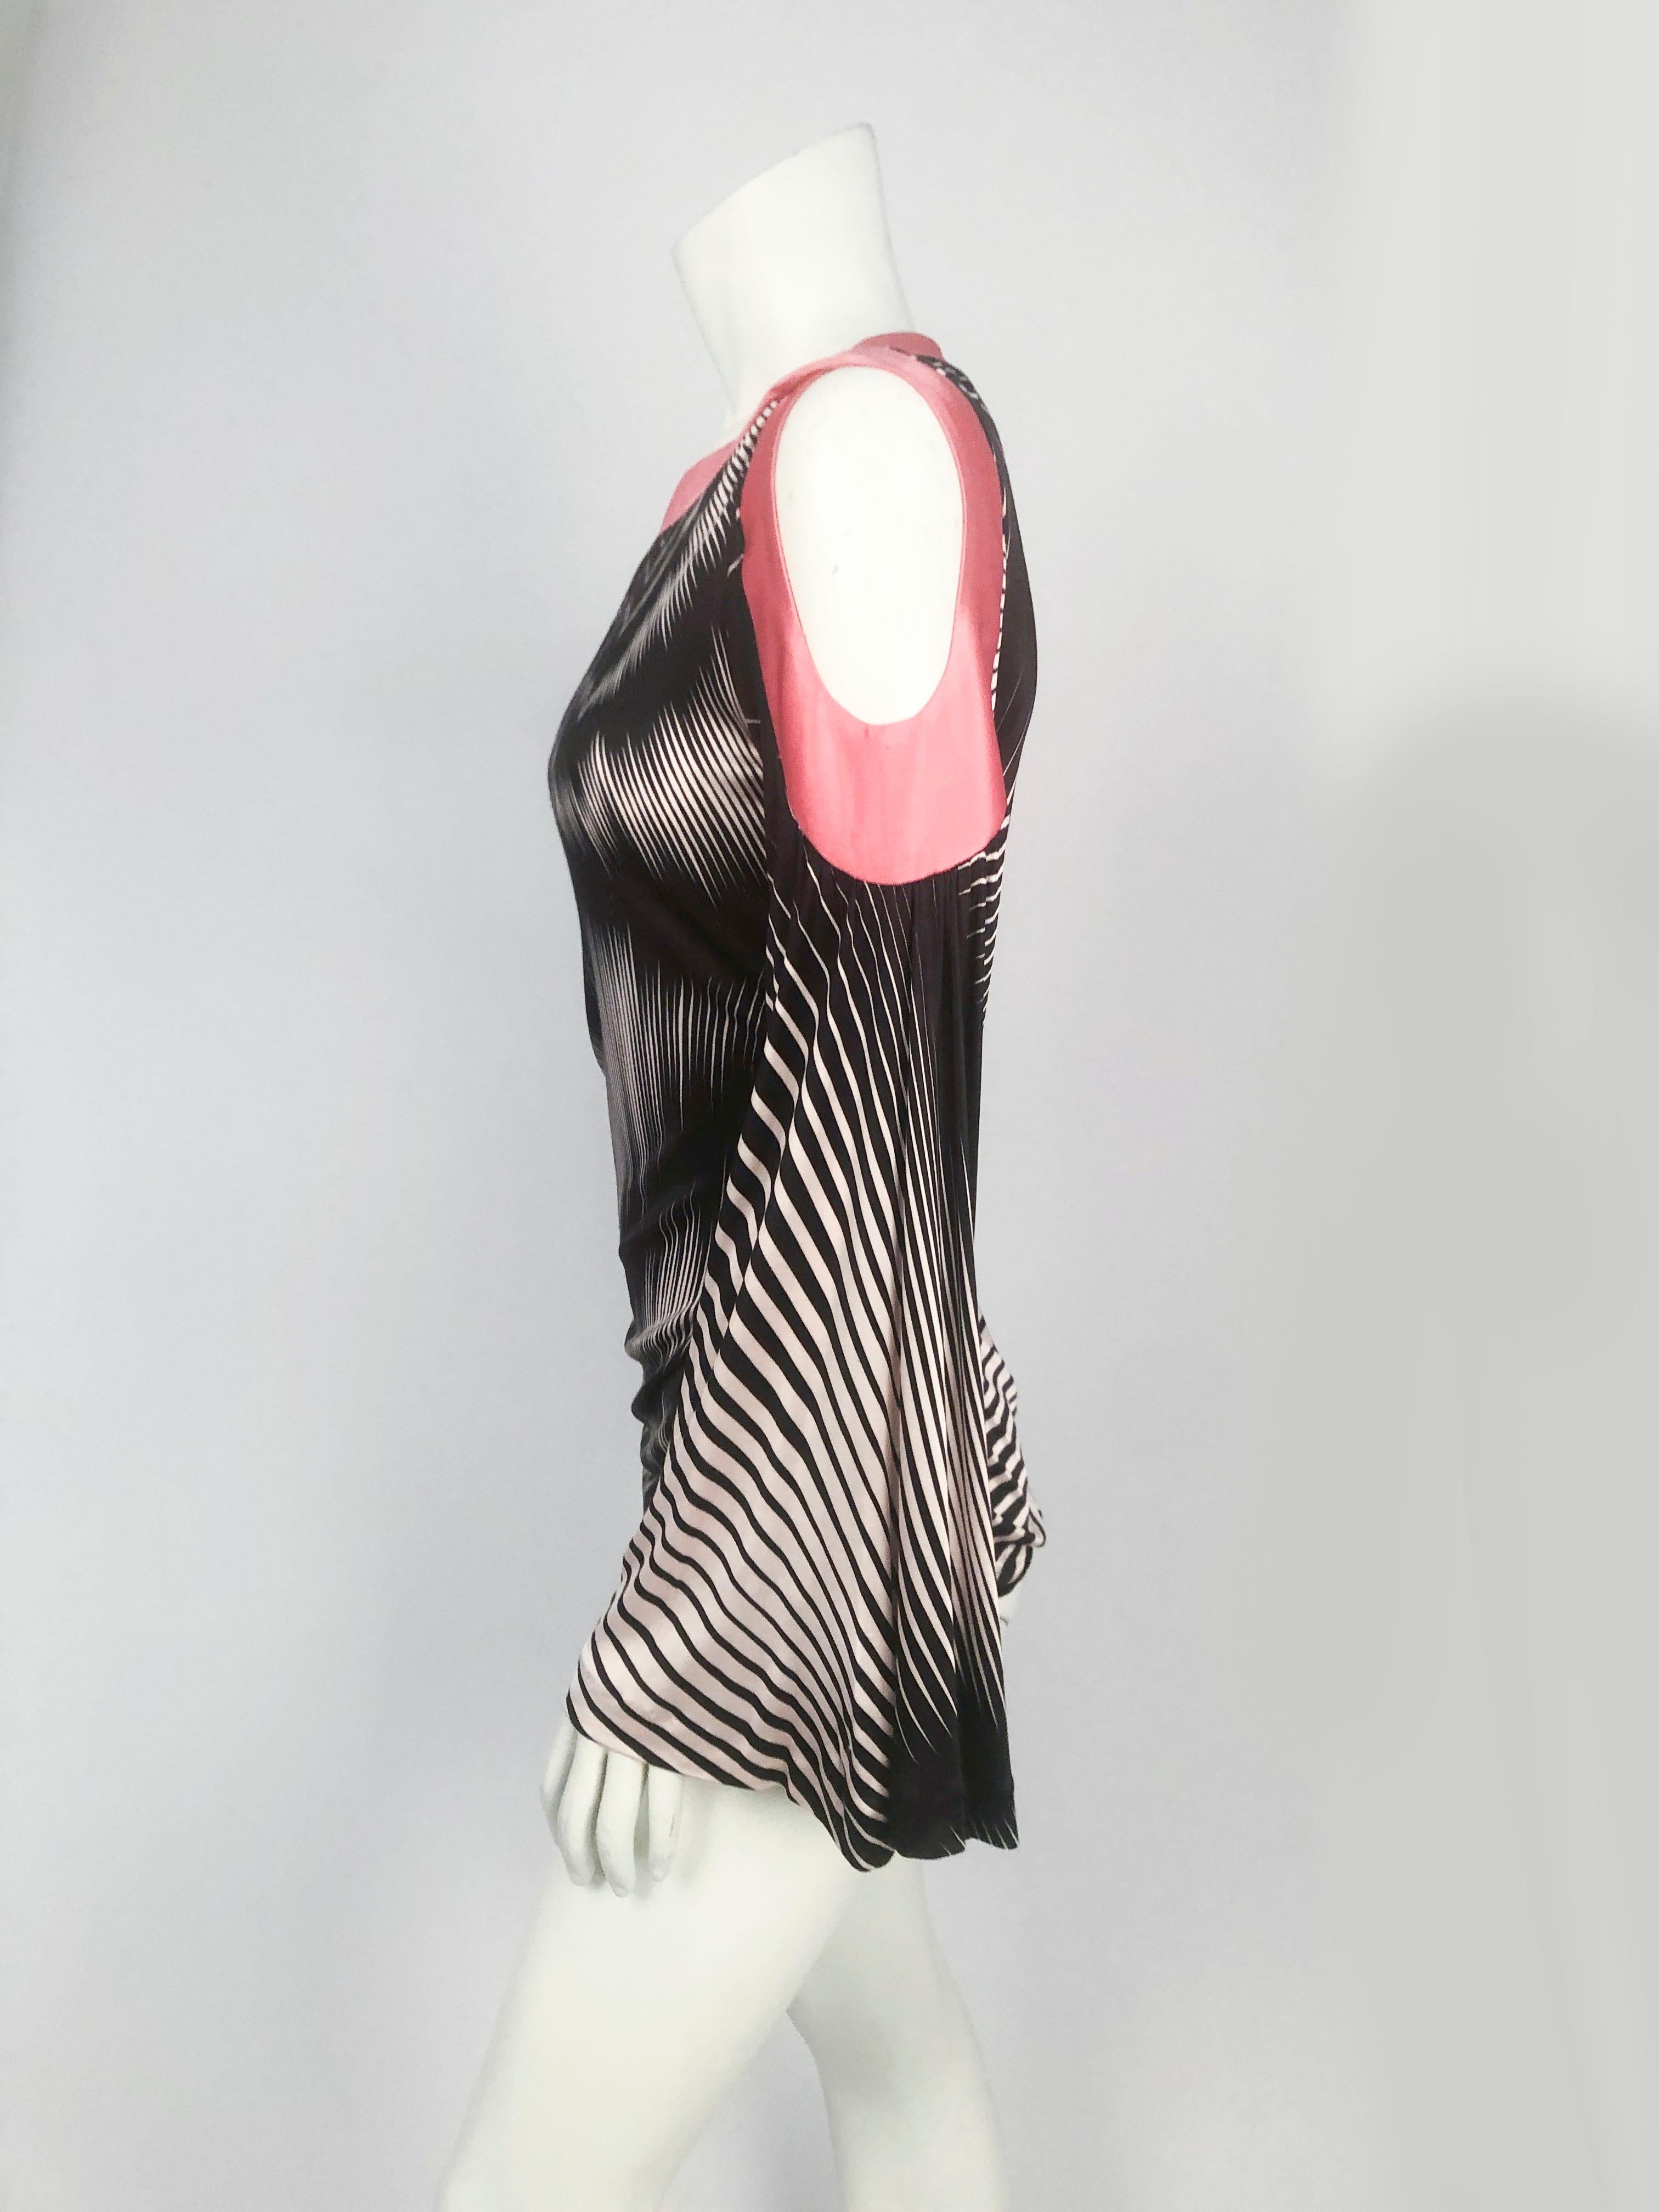 2000s Missoni Printed Blouse with Bell Sleeves, pop art print, hot pink boat neckline, and open shoulders. The sides of this blouse are rouched to create a draped effect